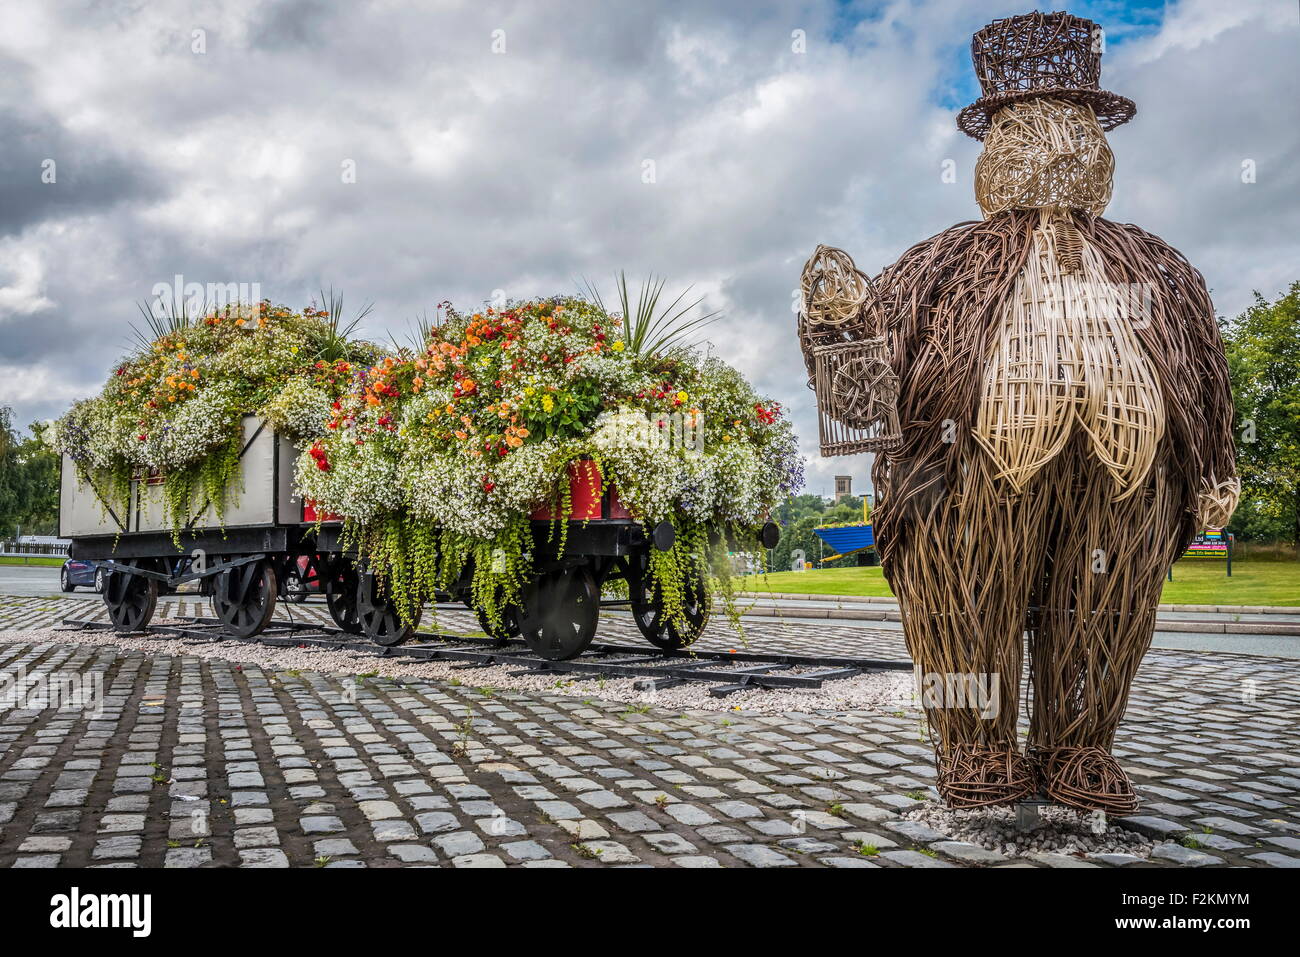 The Fat Controller in wicker as part of the floral displays around Bury town centre with floral railway wagons. Stock Photo